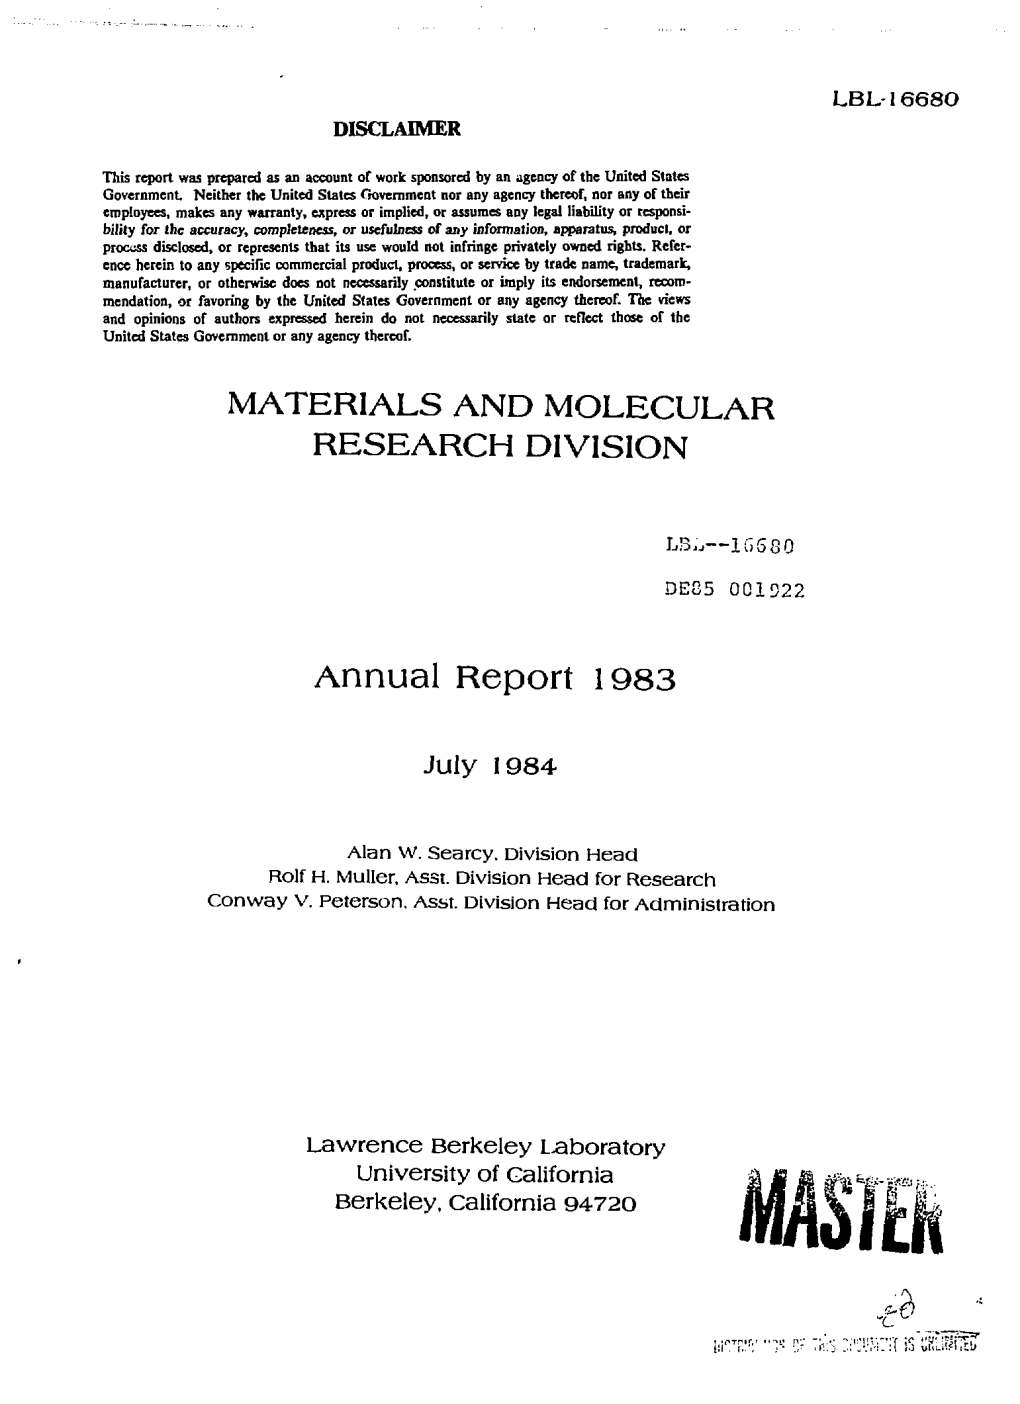 MATERIALS and MOLECULAR RESEARCH DIVISION Annual